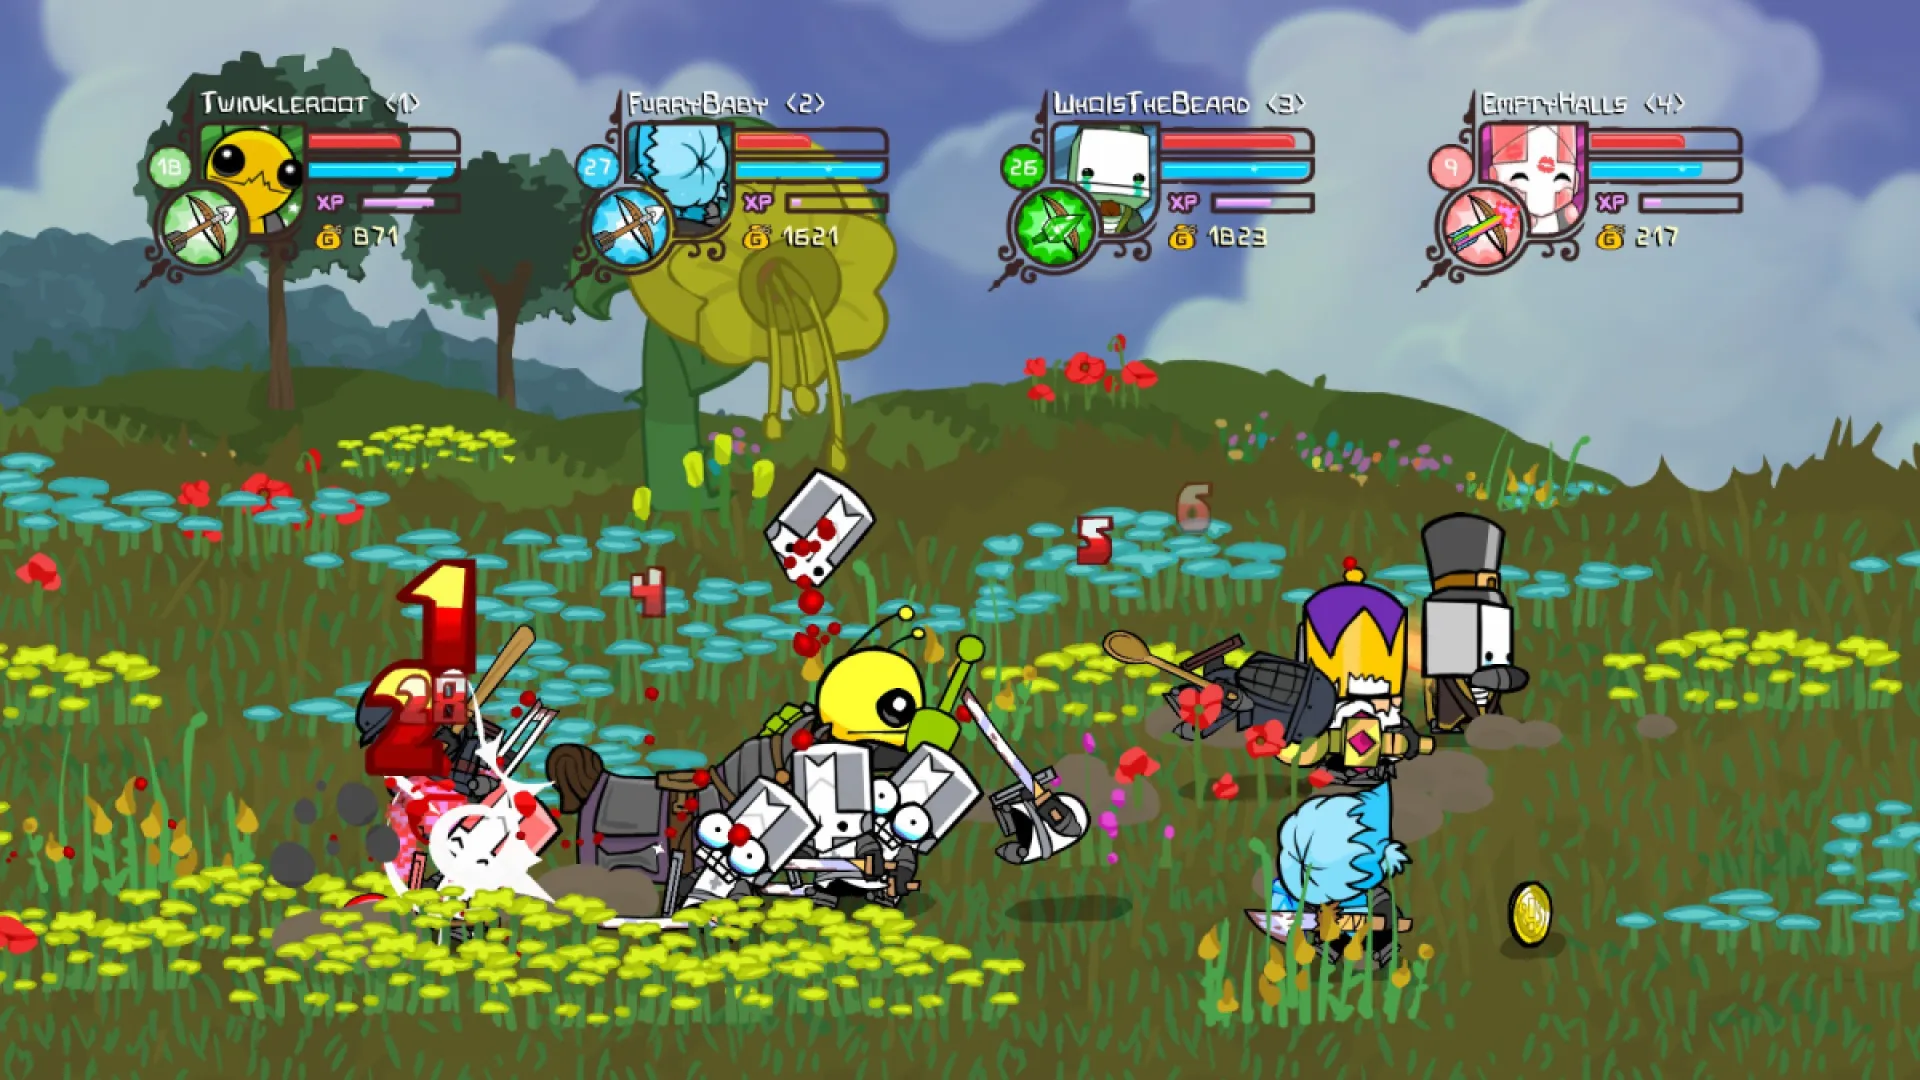 Animated characters in "Castle Crashers" fight in an open field.